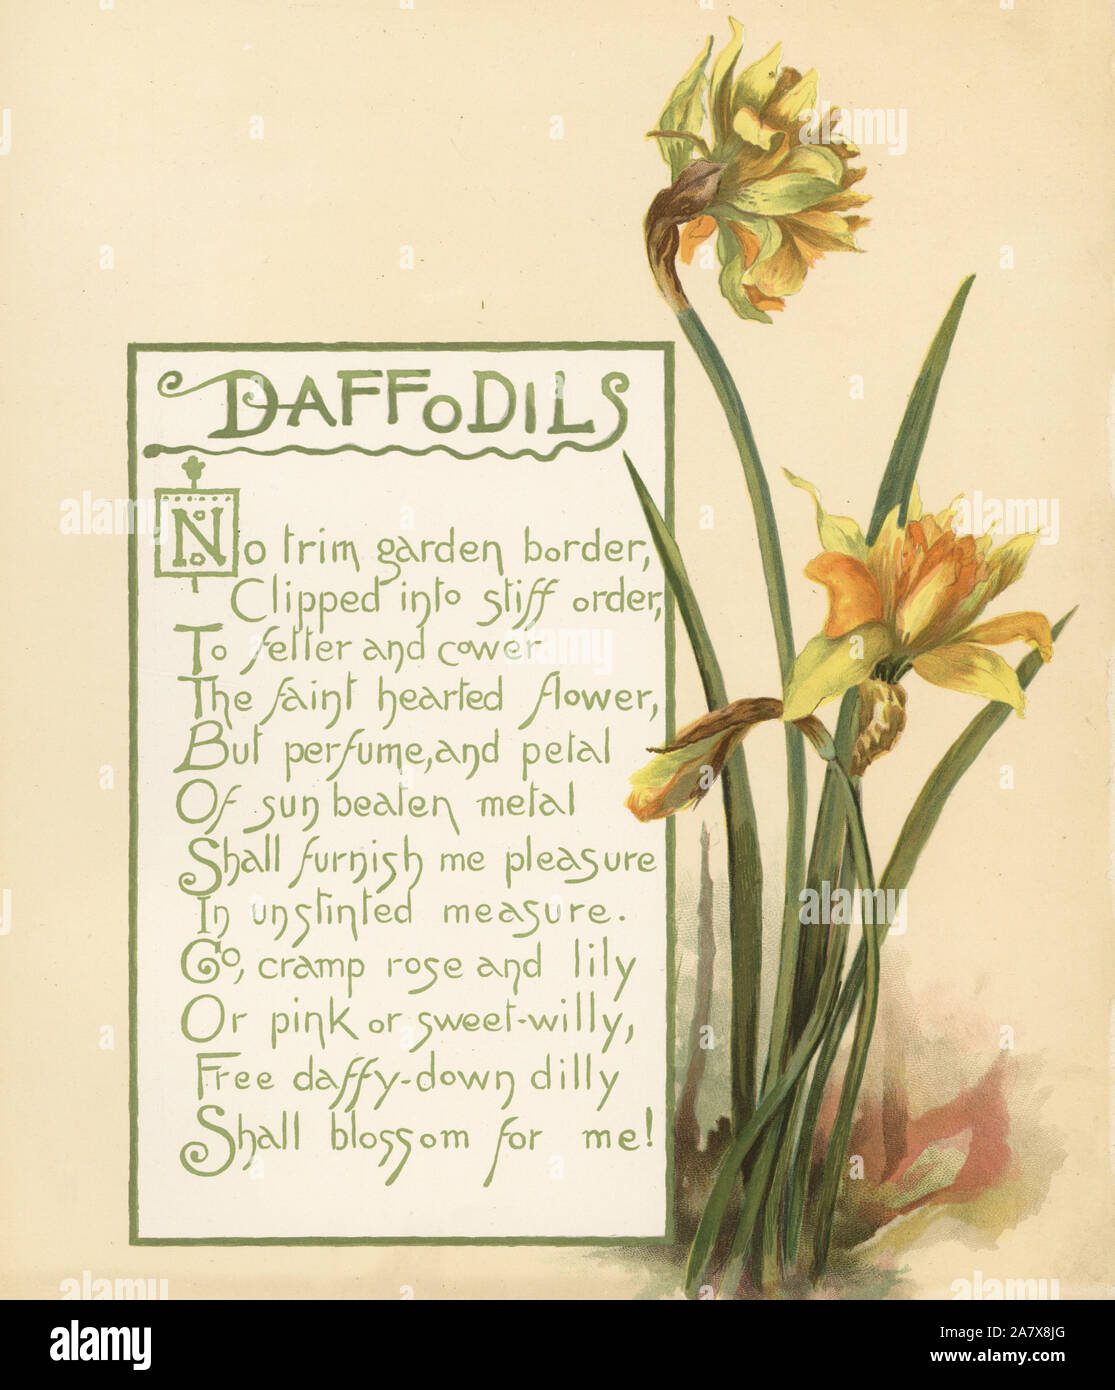 Daffodils, Narcissus pseudonarcissus, with calligraphic poem. Chromolithograph by Louis Prang from Alice Ward Bailey's Flower Fancies, Boston, 1889. Illustrated by Lucy Baily, Eleanor Ecob Morse, Olive Whitney, Ellen Fisher, Fidelia Bridges, C. Ryan and F. Schuyler Mathews. Stock Photo